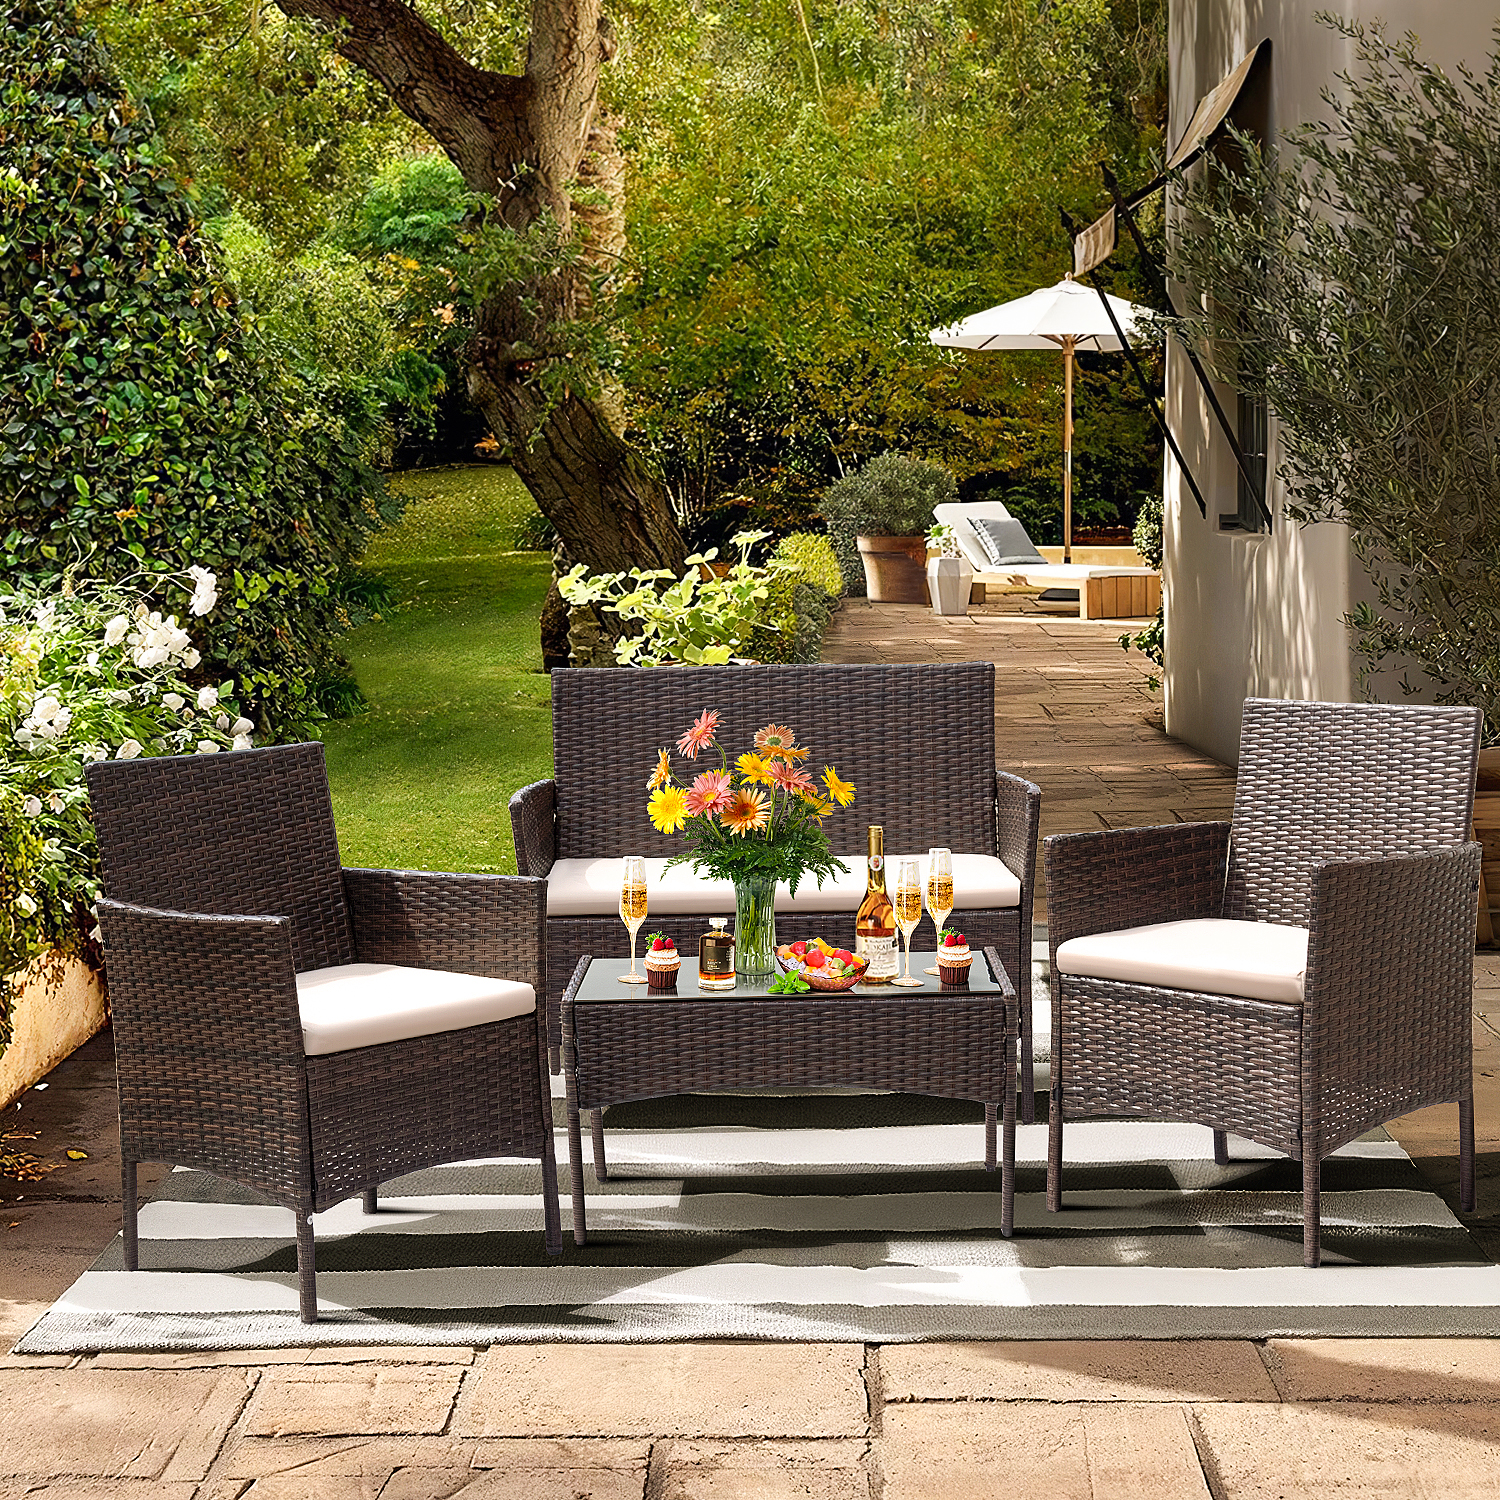 Lacoo 4 Pieces Patio Conversation Set Outdoor PE Rattan Wicker Chairs Set and Table